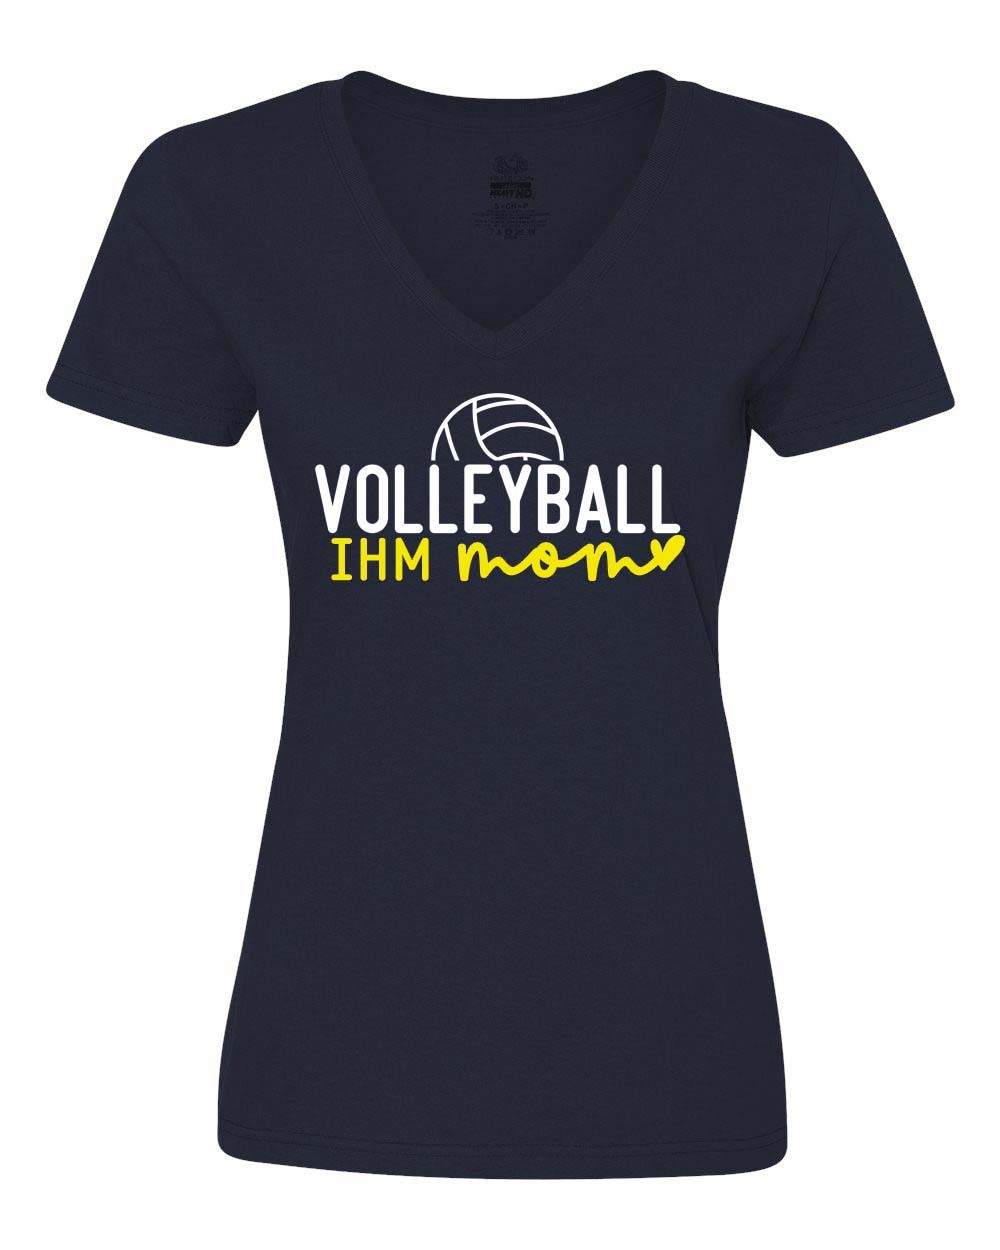 IHM Volleyball Mom S/S T-Shirt w/ Logo - Please Allow 2-3 Weeks For Delivery 